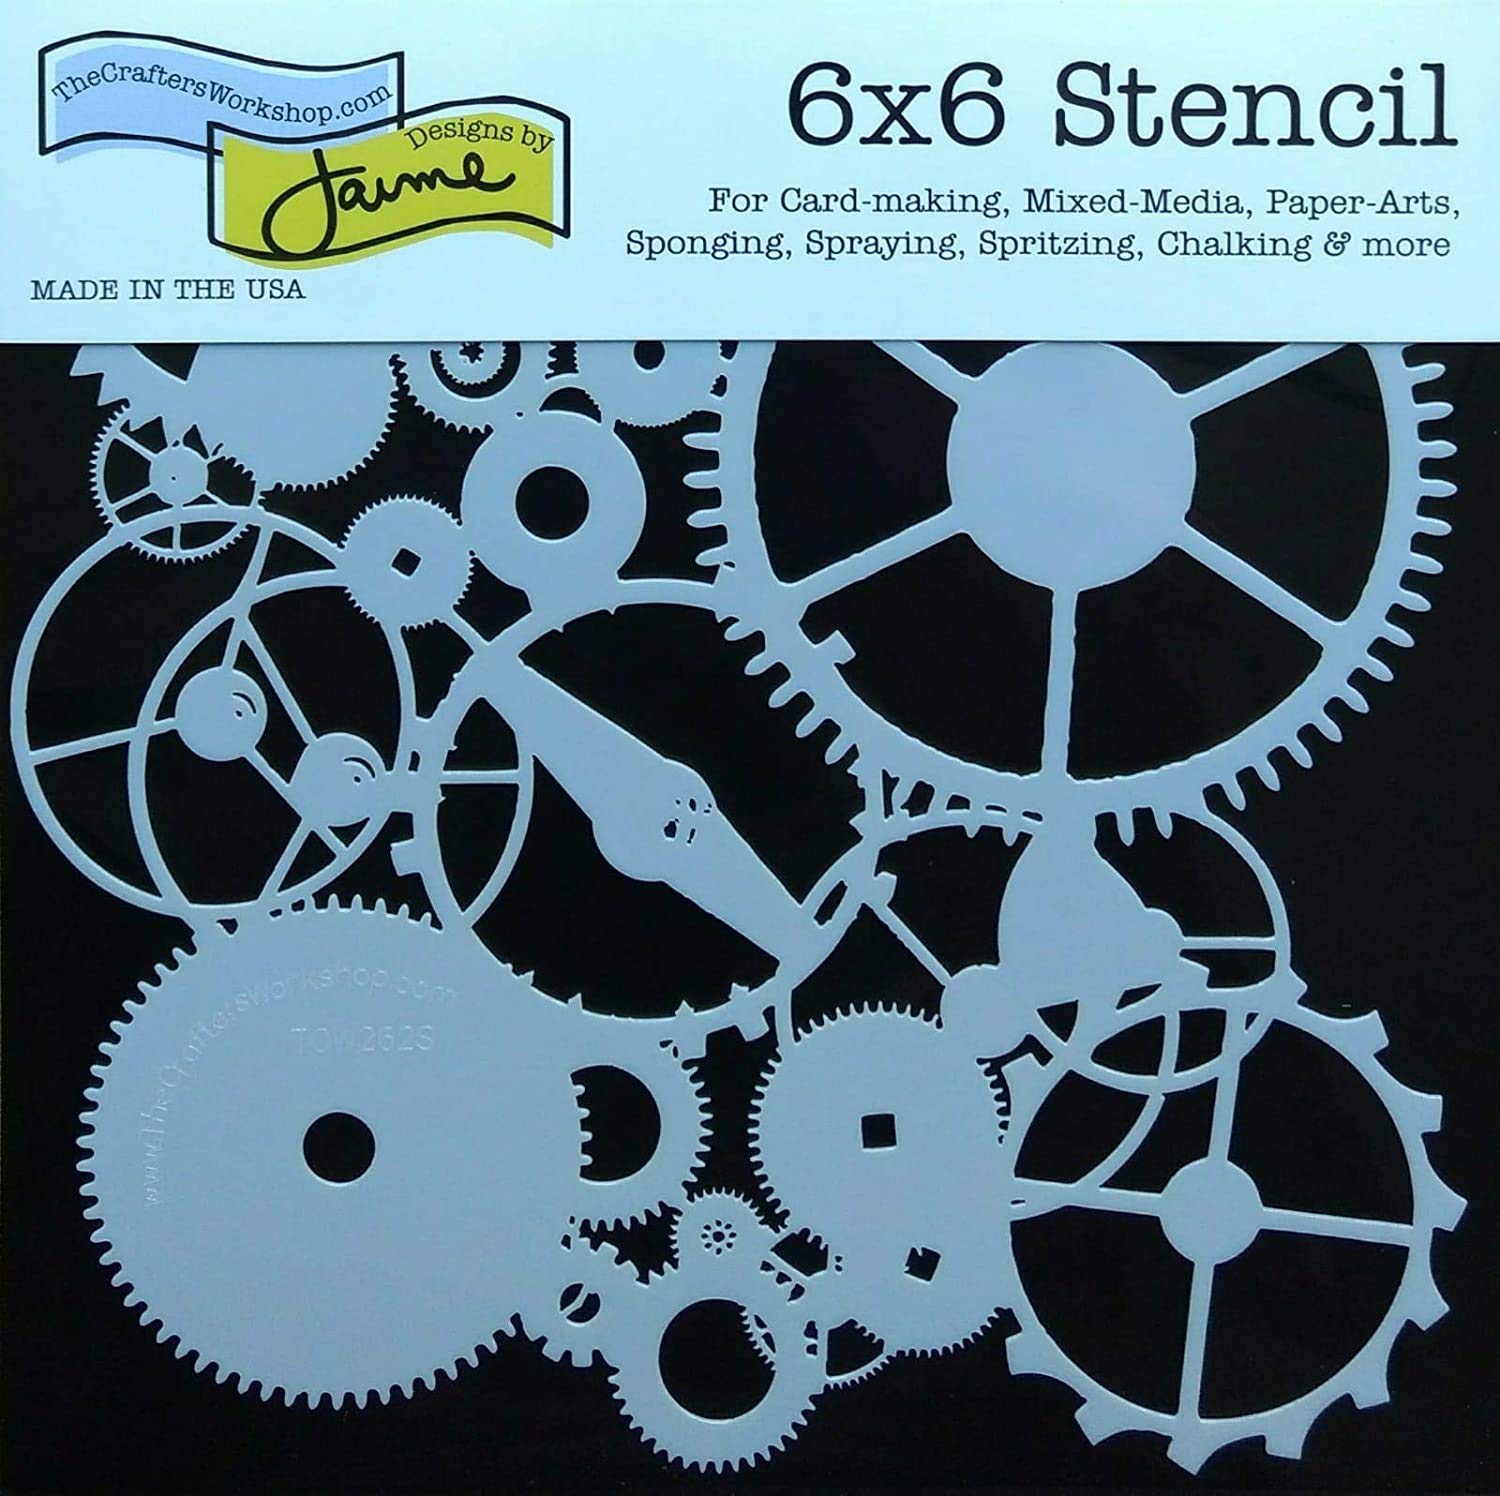 3 Crafters Workshop Mixed Media Stencils | Gears, Clock, Steampunk, Watch Face, Flower Designs | for Journaling, Scrapbooking, Card Making | 6 Inch x 6 Inch Templates Set with Board, Total 4 Items